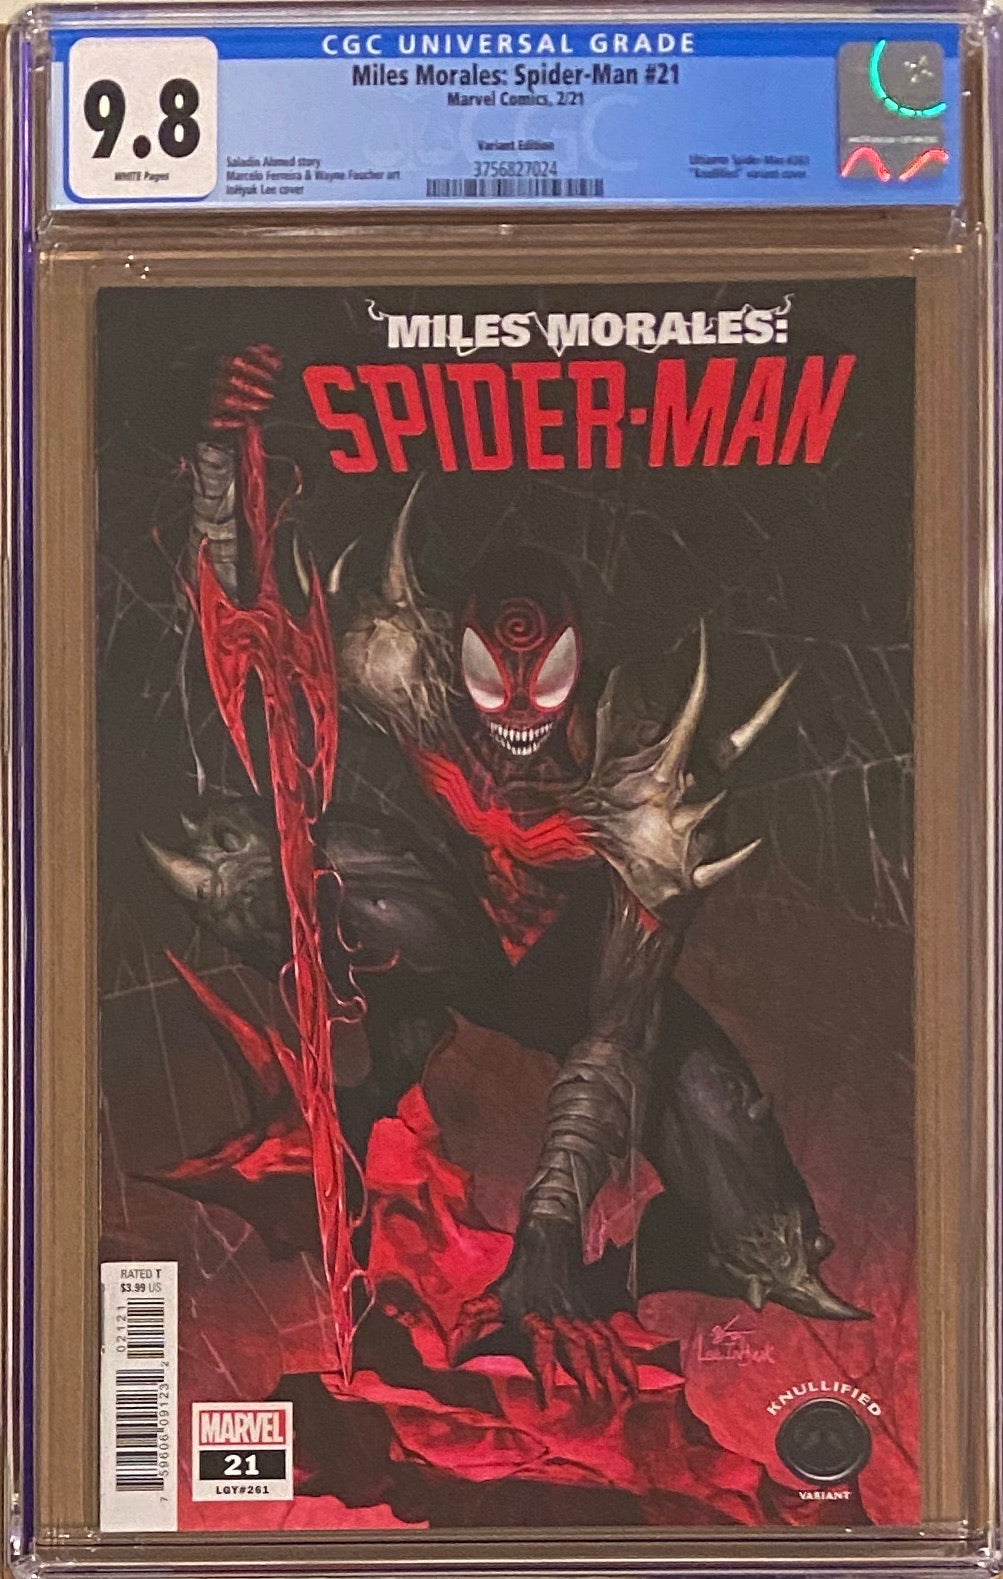 Miles Morales: Spider-Man #21 "Knullified" Variant CGC 9.8